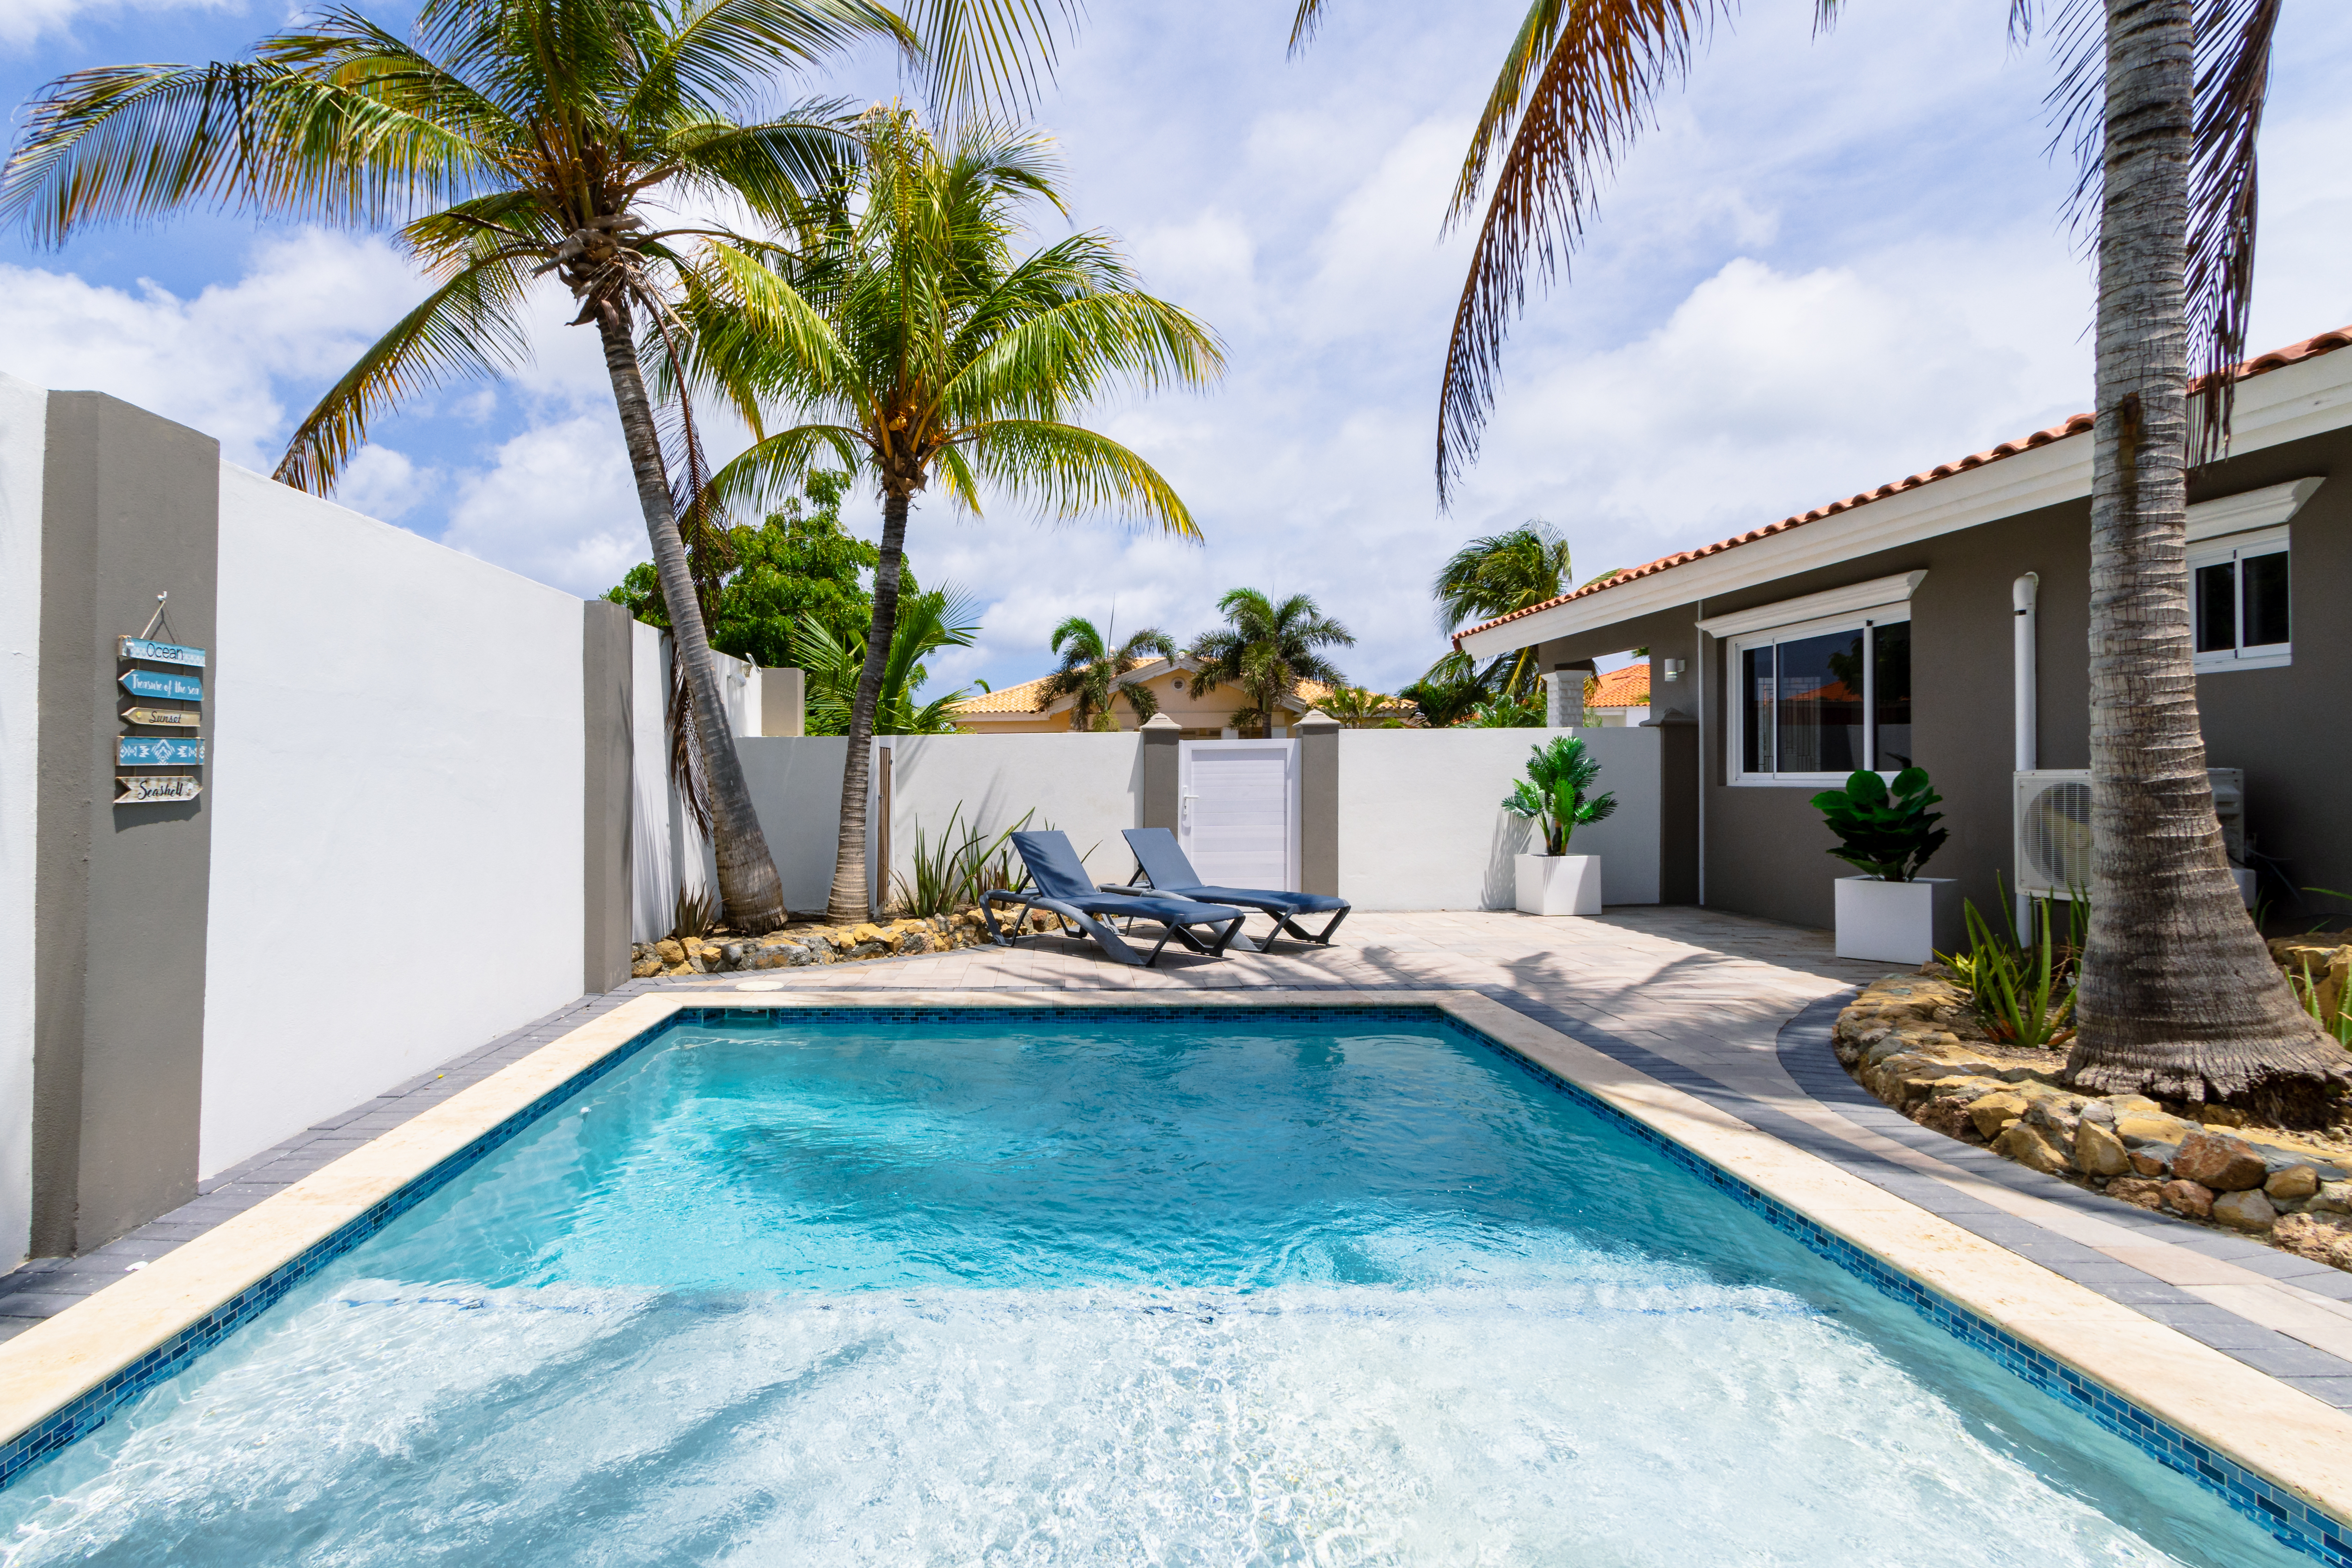 Resplendent Resort in Noord Aruba - Lavish Swimming Pool - Experience ultimate relaxation in our poolside paradise - Discover bliss by the pool in our serene setting - Inviting pool area for a perfect getaway - Surrounded by tropical Trees